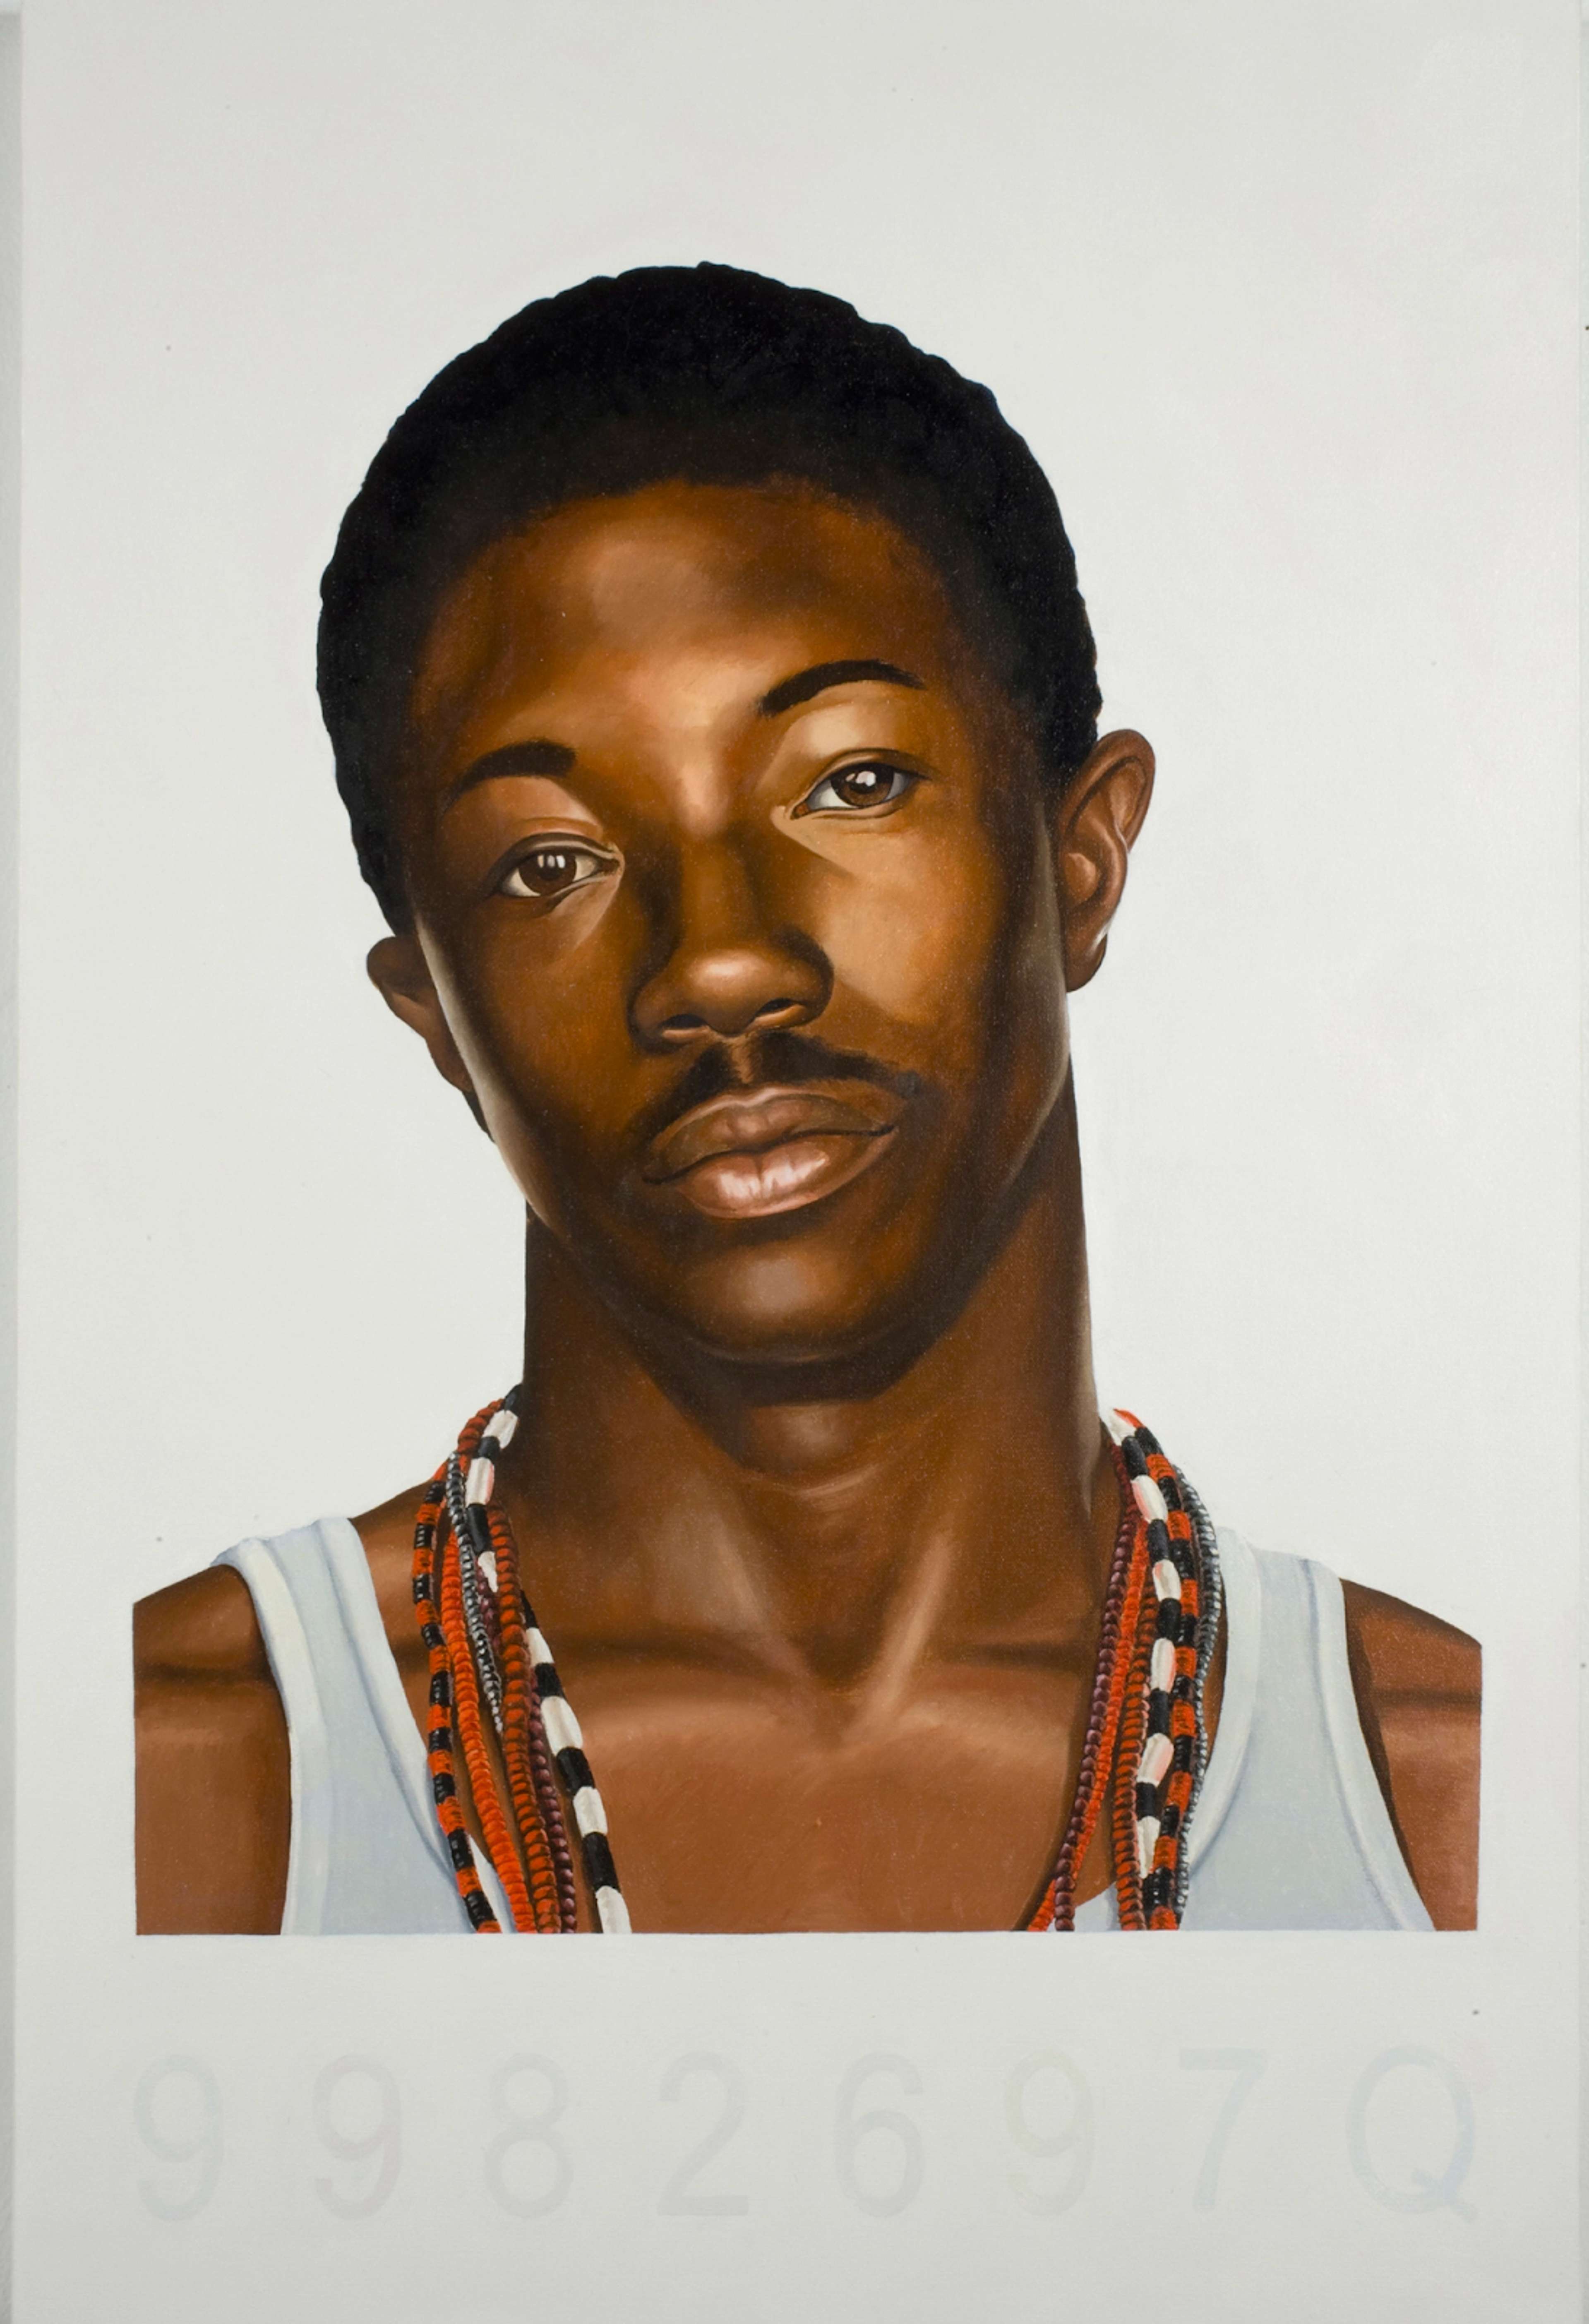 A painted mugshot of a young man. Wearing a white vest and beaded necklaces, he looks directly at the camera. A line of numbers, presumably a case number, is underneath his portrait.